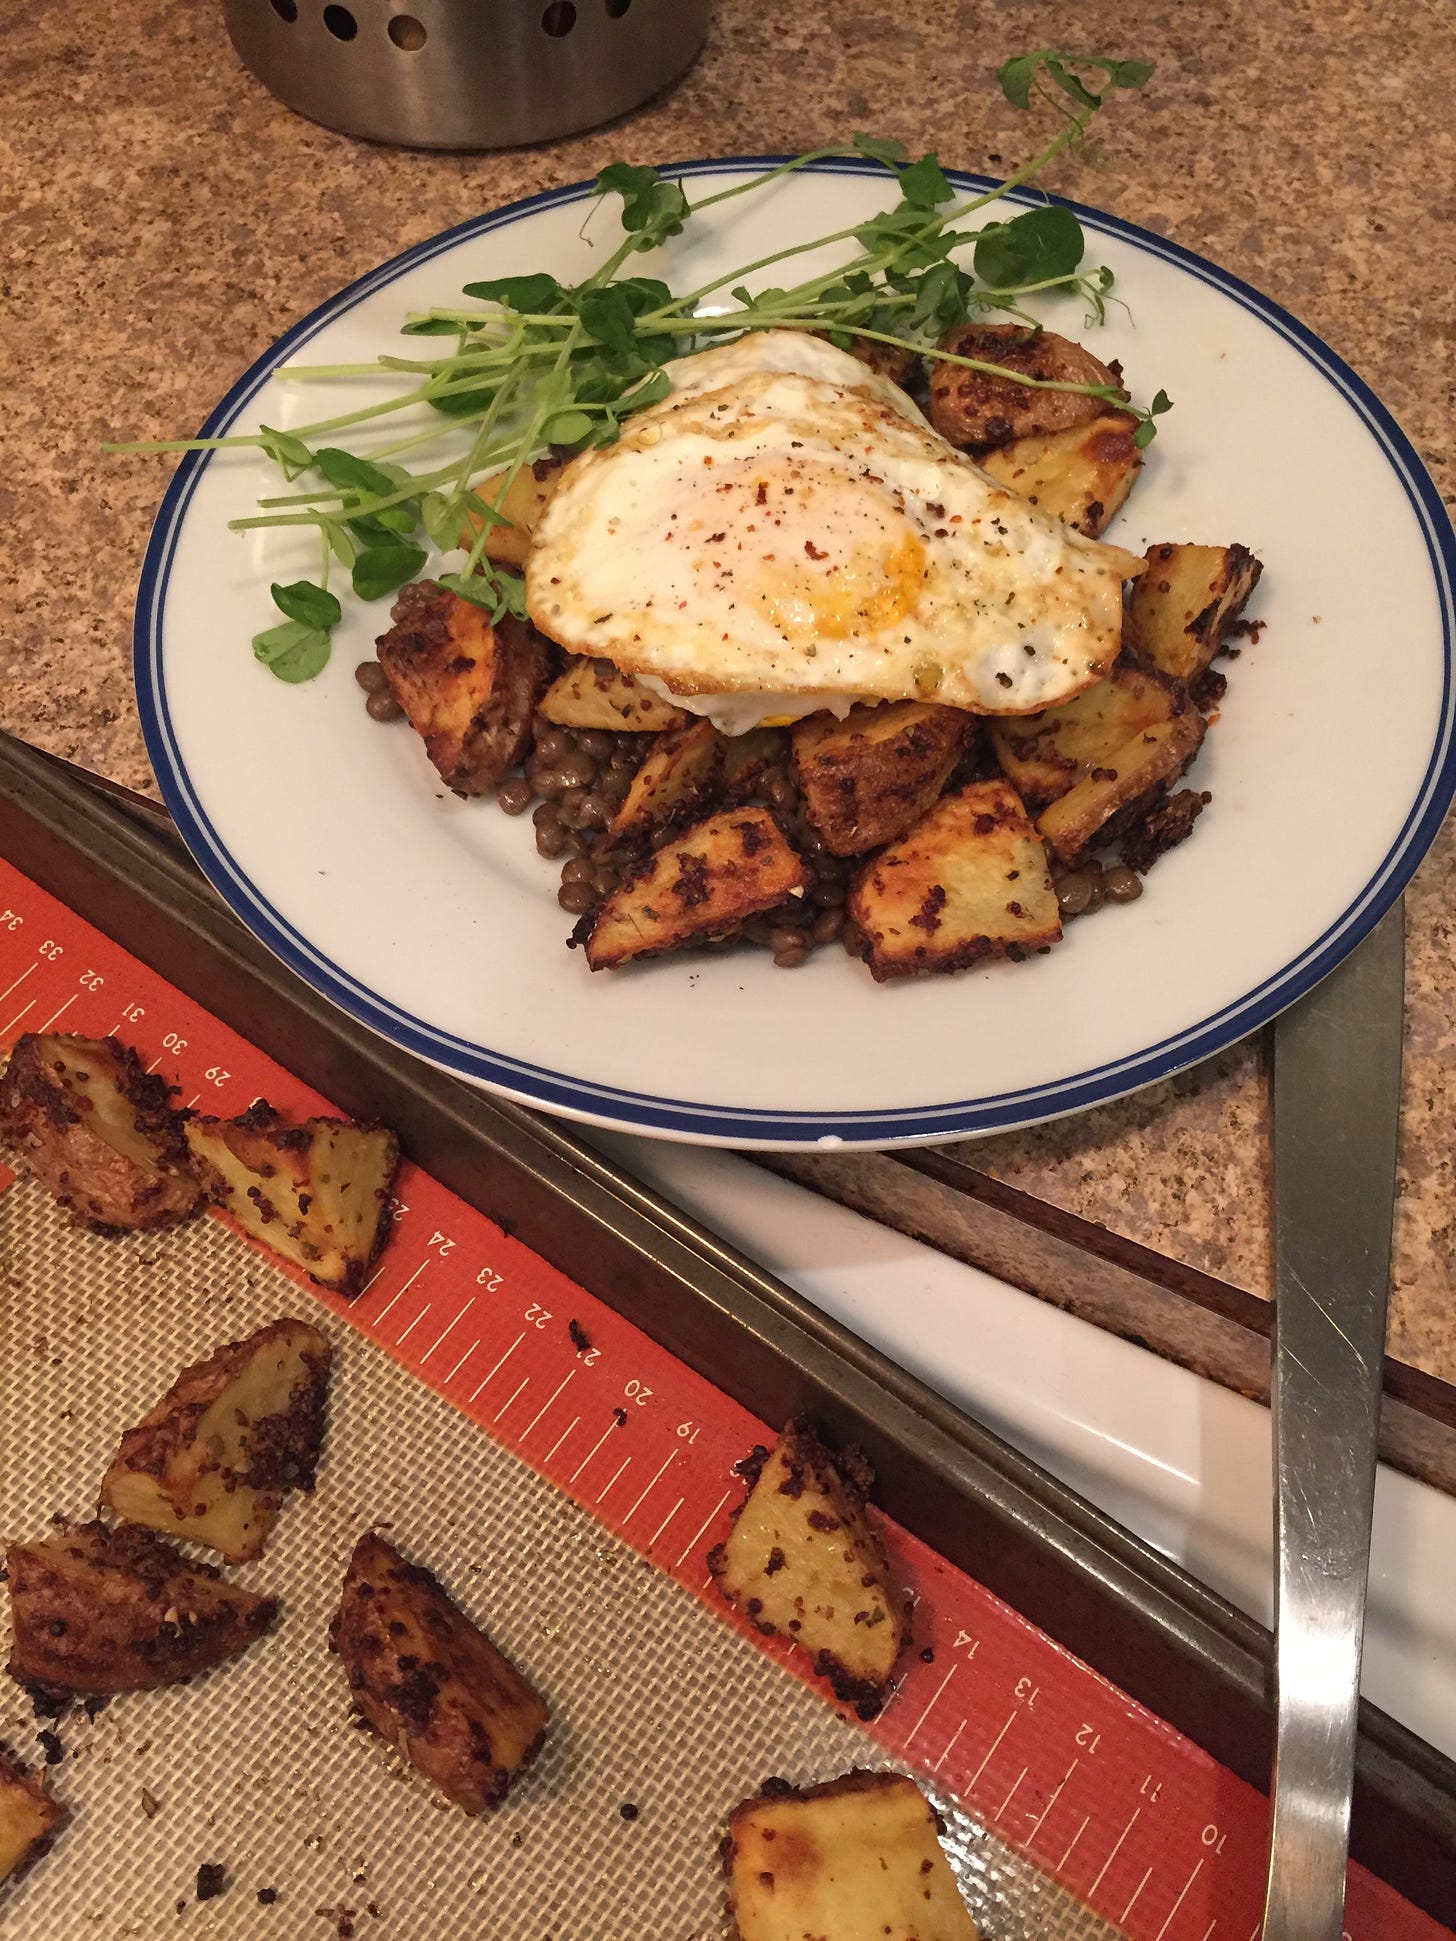 In the foreground, a corner of a baking pan covered with a silpat and pieces of potato, and the handle of a metal spatula is just visible. Behind it is a plate holding some of the potatoes on top of a bed of lentils, with a crispy fried egg sprinkled with chili flakes on top, and a little pile of pea shoots to the side.